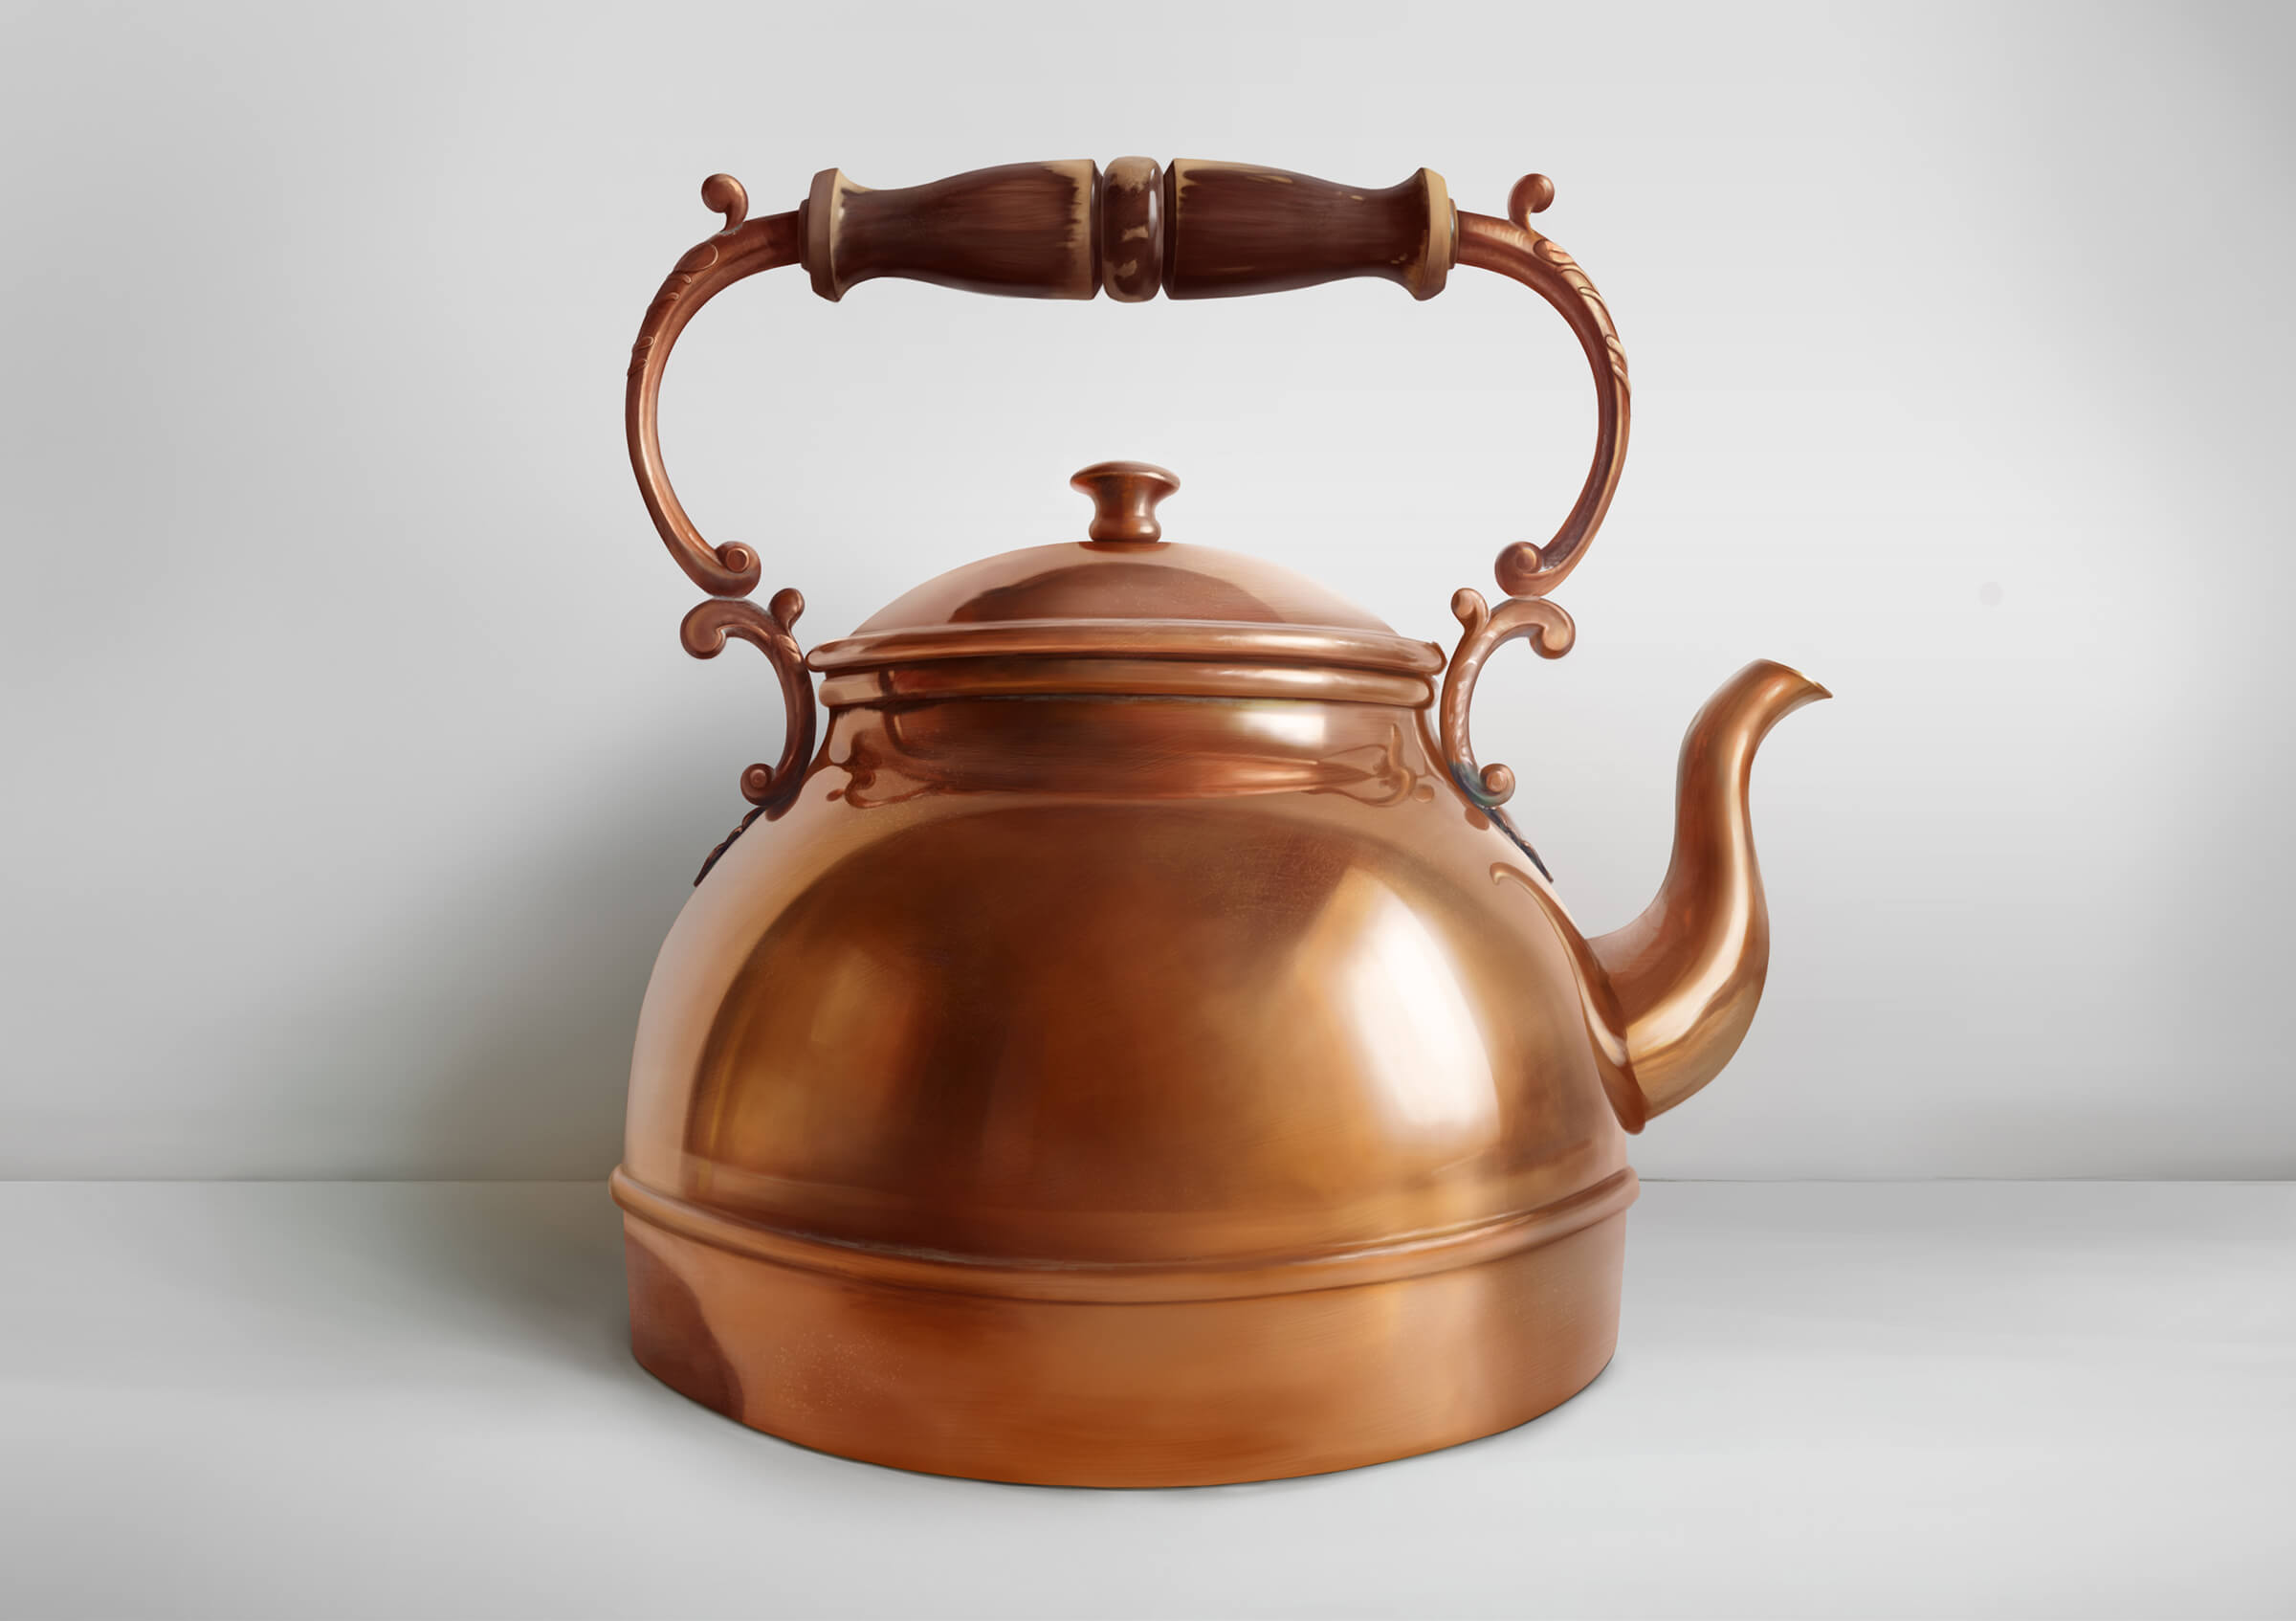 Still life painting of a copper kettle against a white background with an ornate wooden handle above.